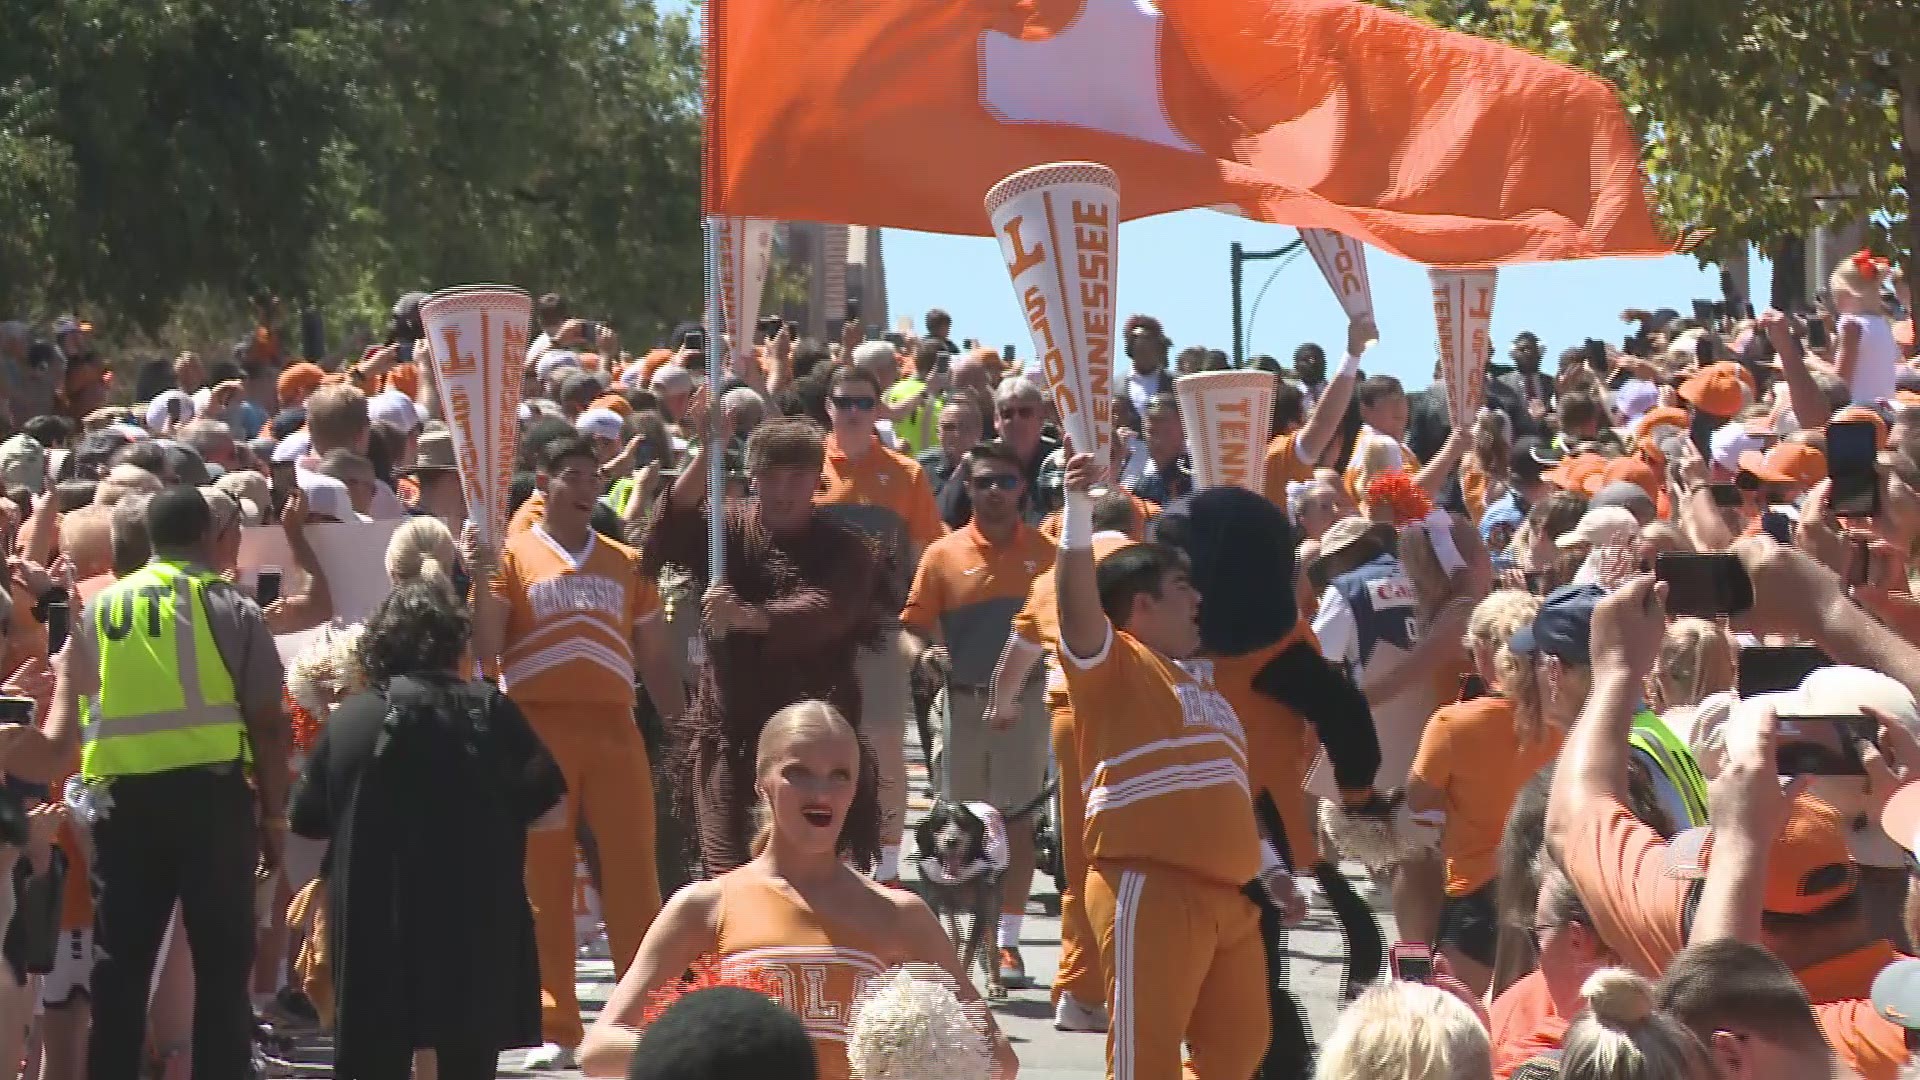 The Vols did their first Vol Walk of the 2019 season on Saturday afternoon.